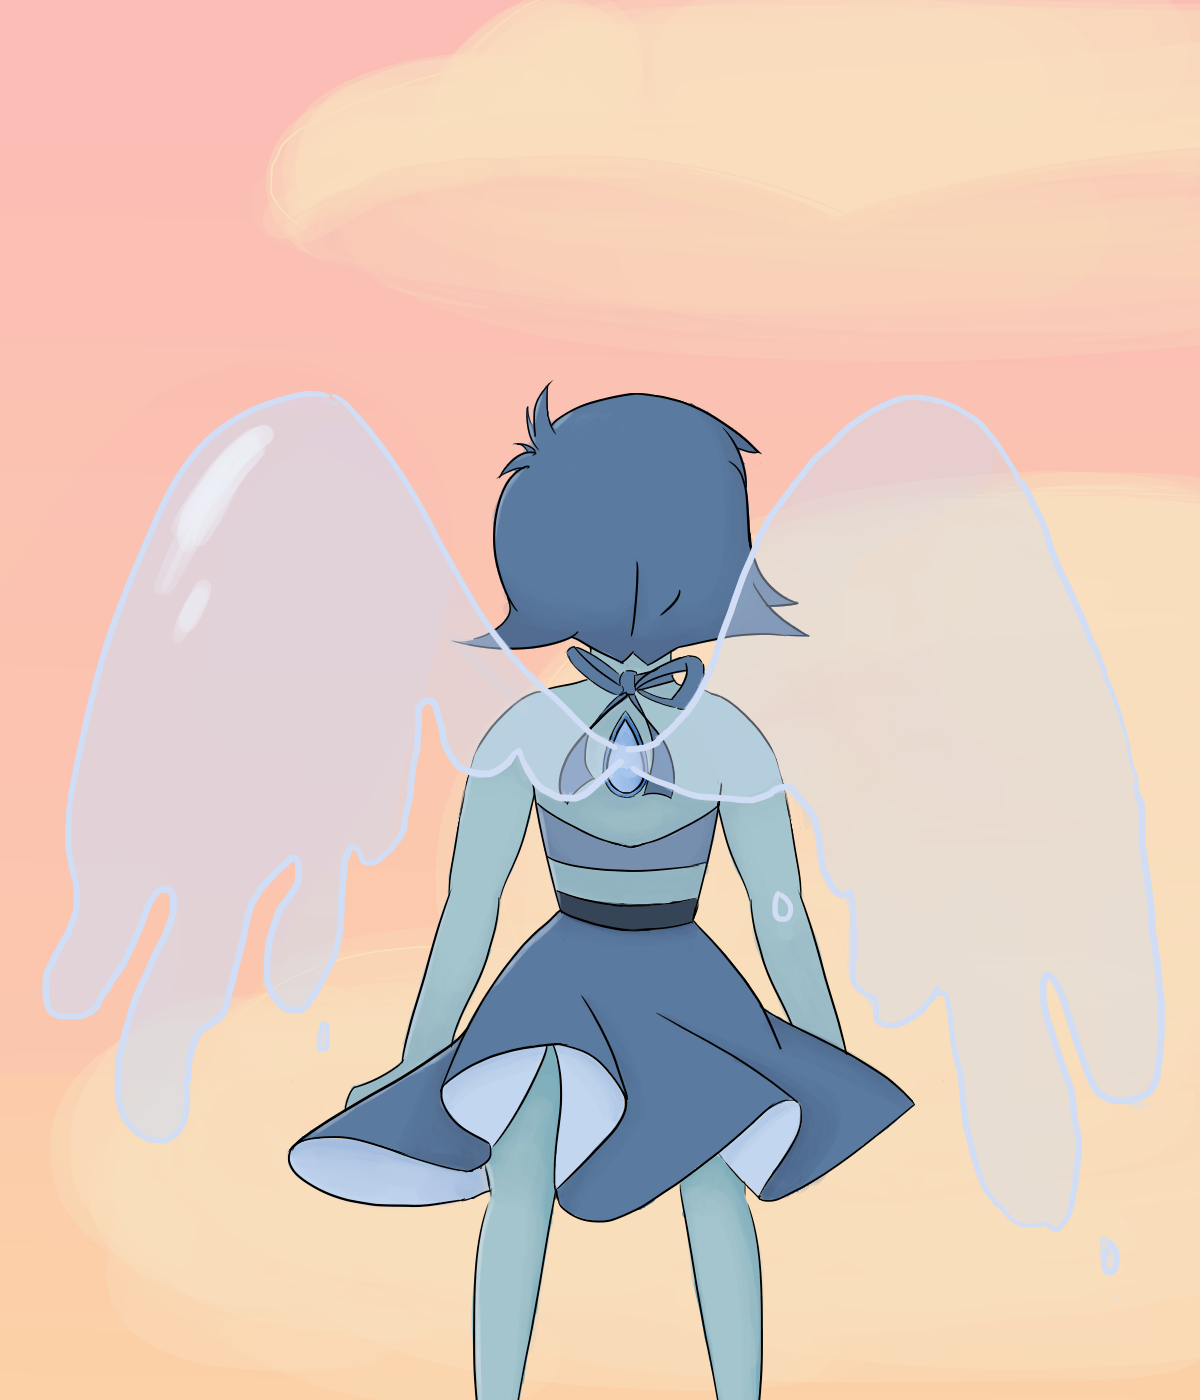 Quick Lapis drawing from the most recent episodes :)